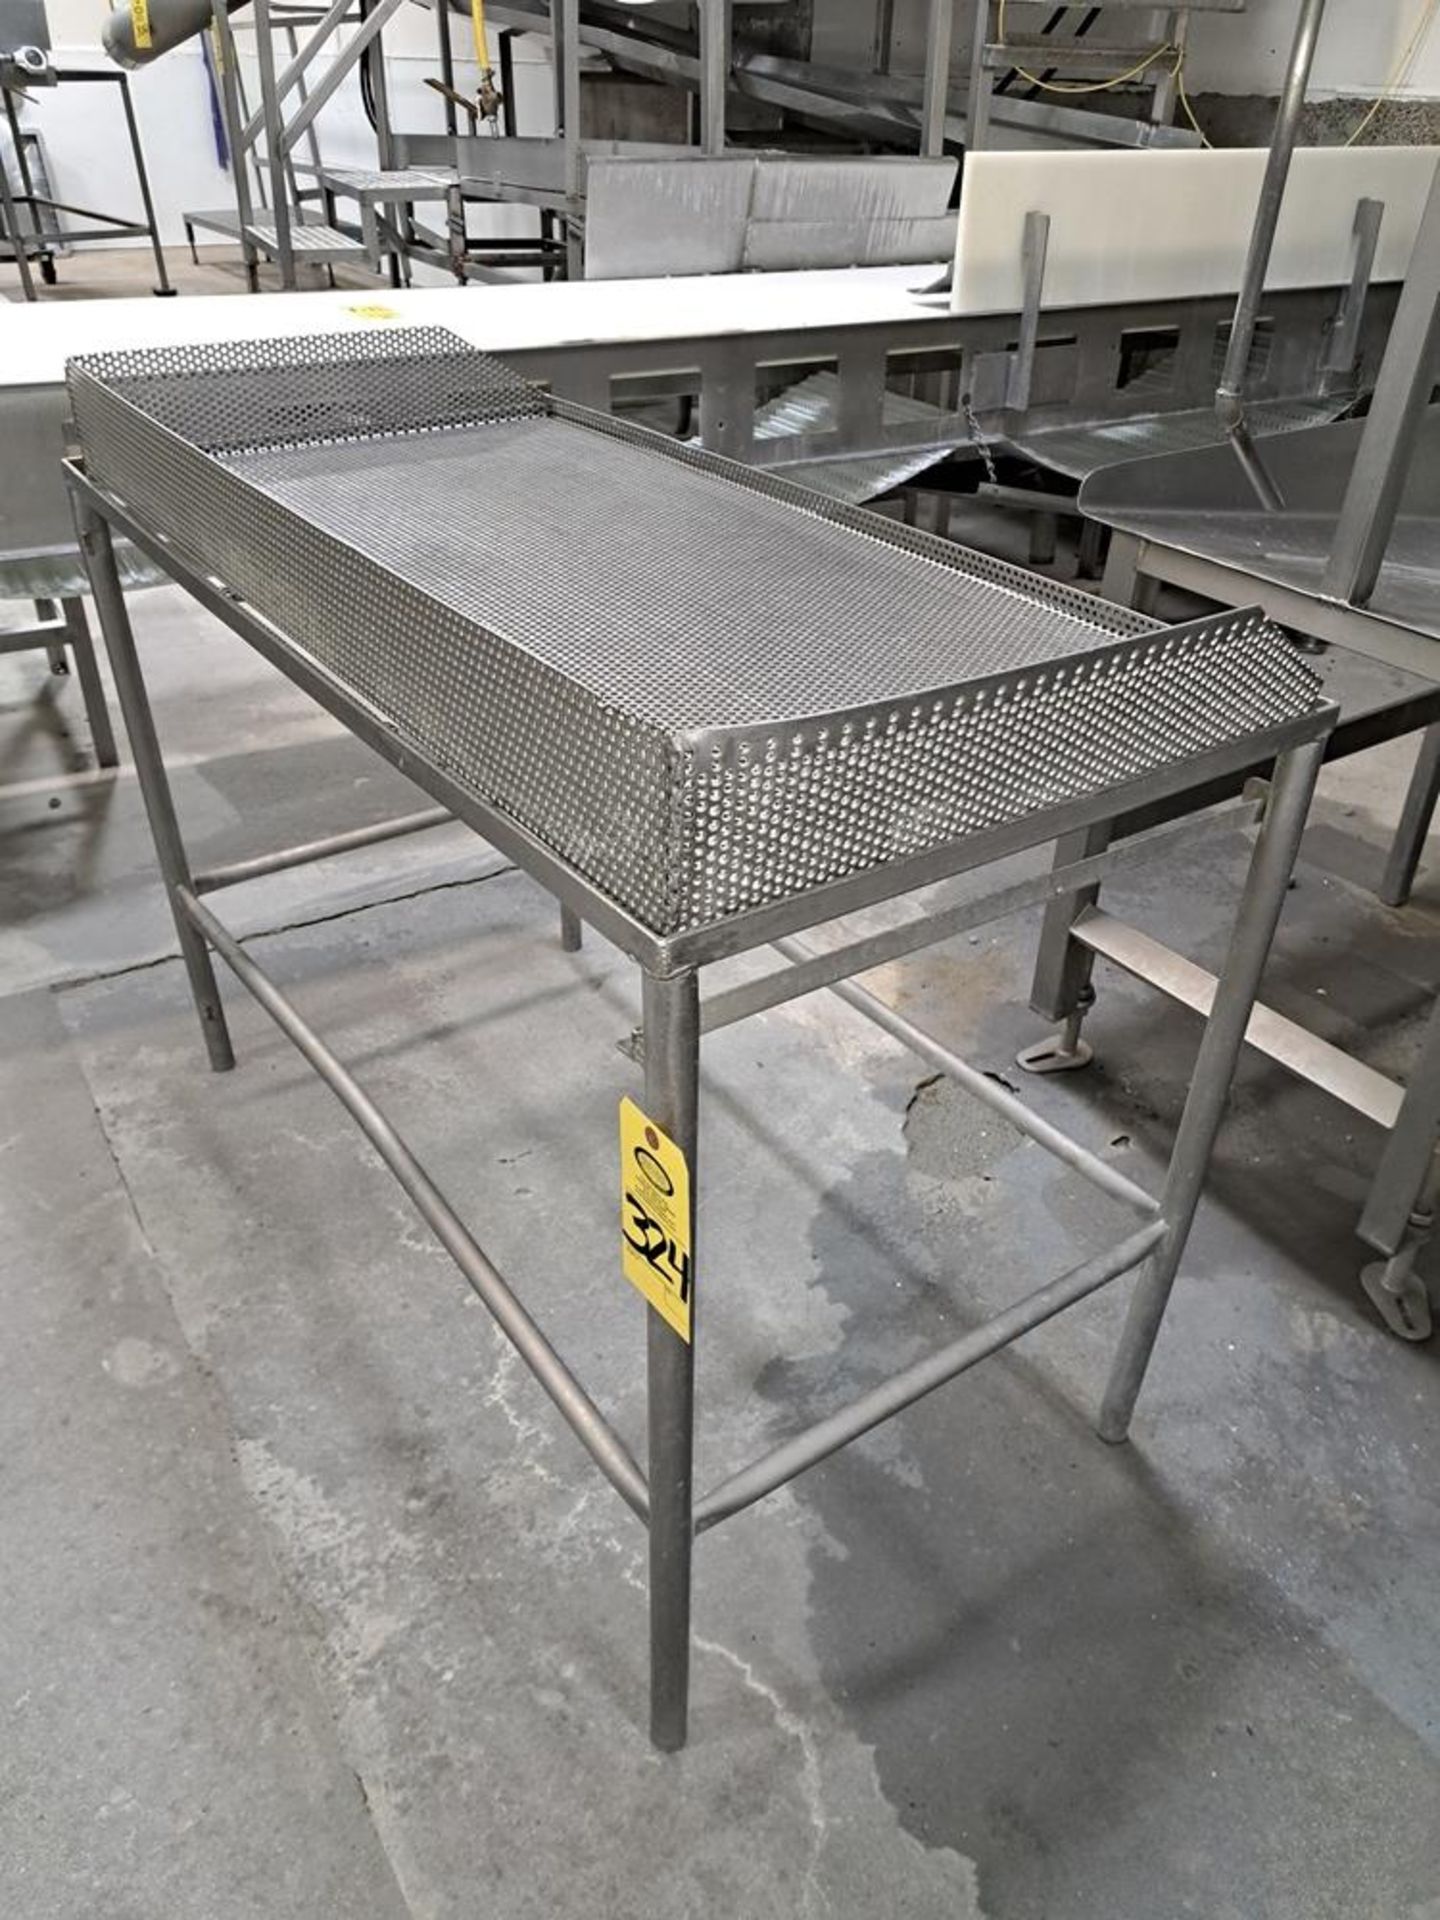 Stainless Steel Inspection Table, 24" W X 48" L: Required Loading Fee $75.00, Rigger-Norm Pavlish, - Image 2 of 2